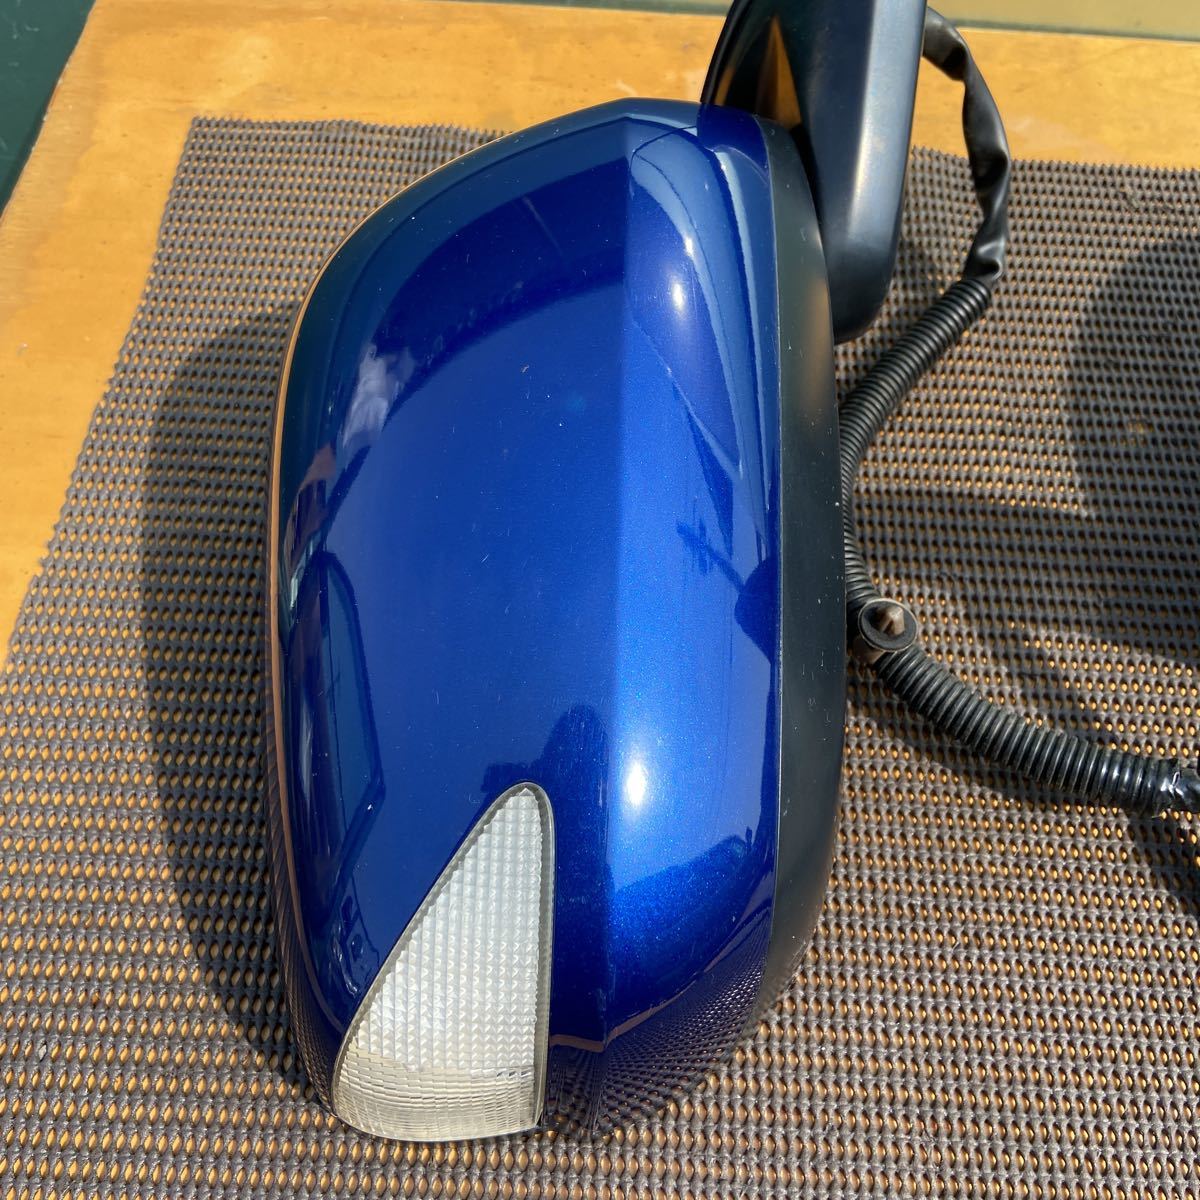  Honda Fit GE8 RS previous term original door mirror side mirror 9 pin mirror switch attaching inside with cover color B548P deep sapphire blue 